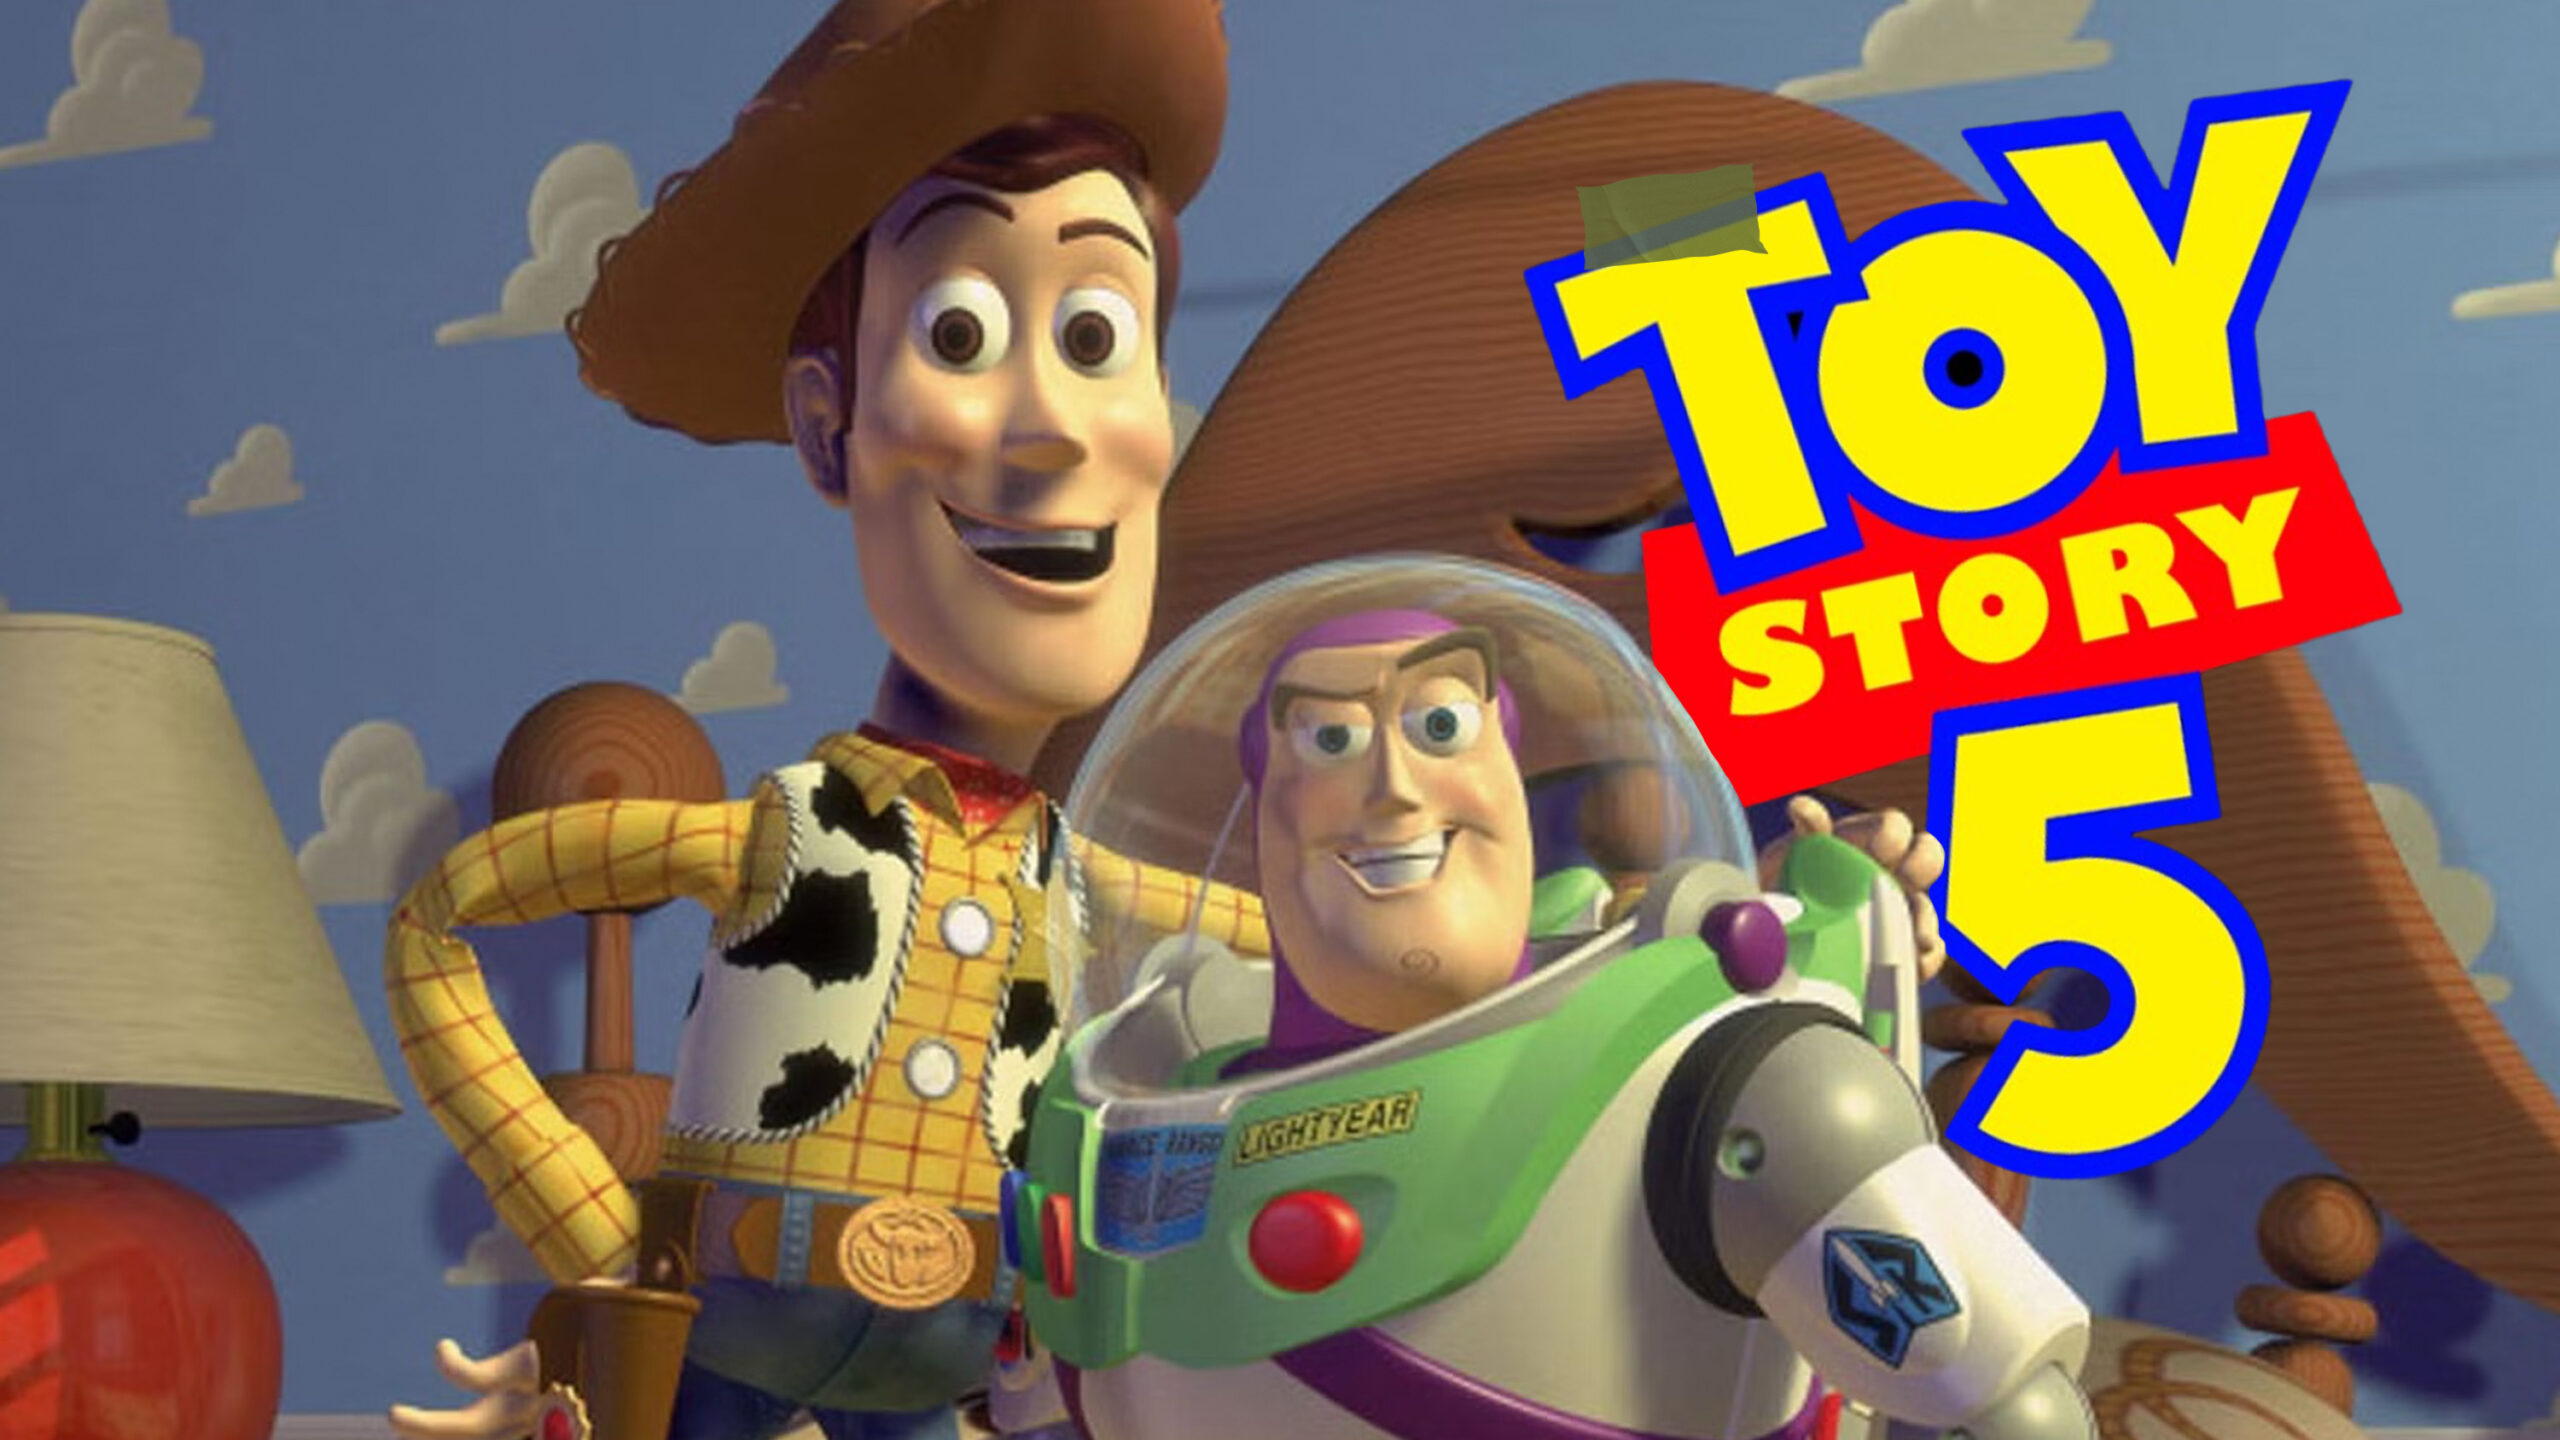 Is this actually real? Is there a toy story 5 coming out in 2024